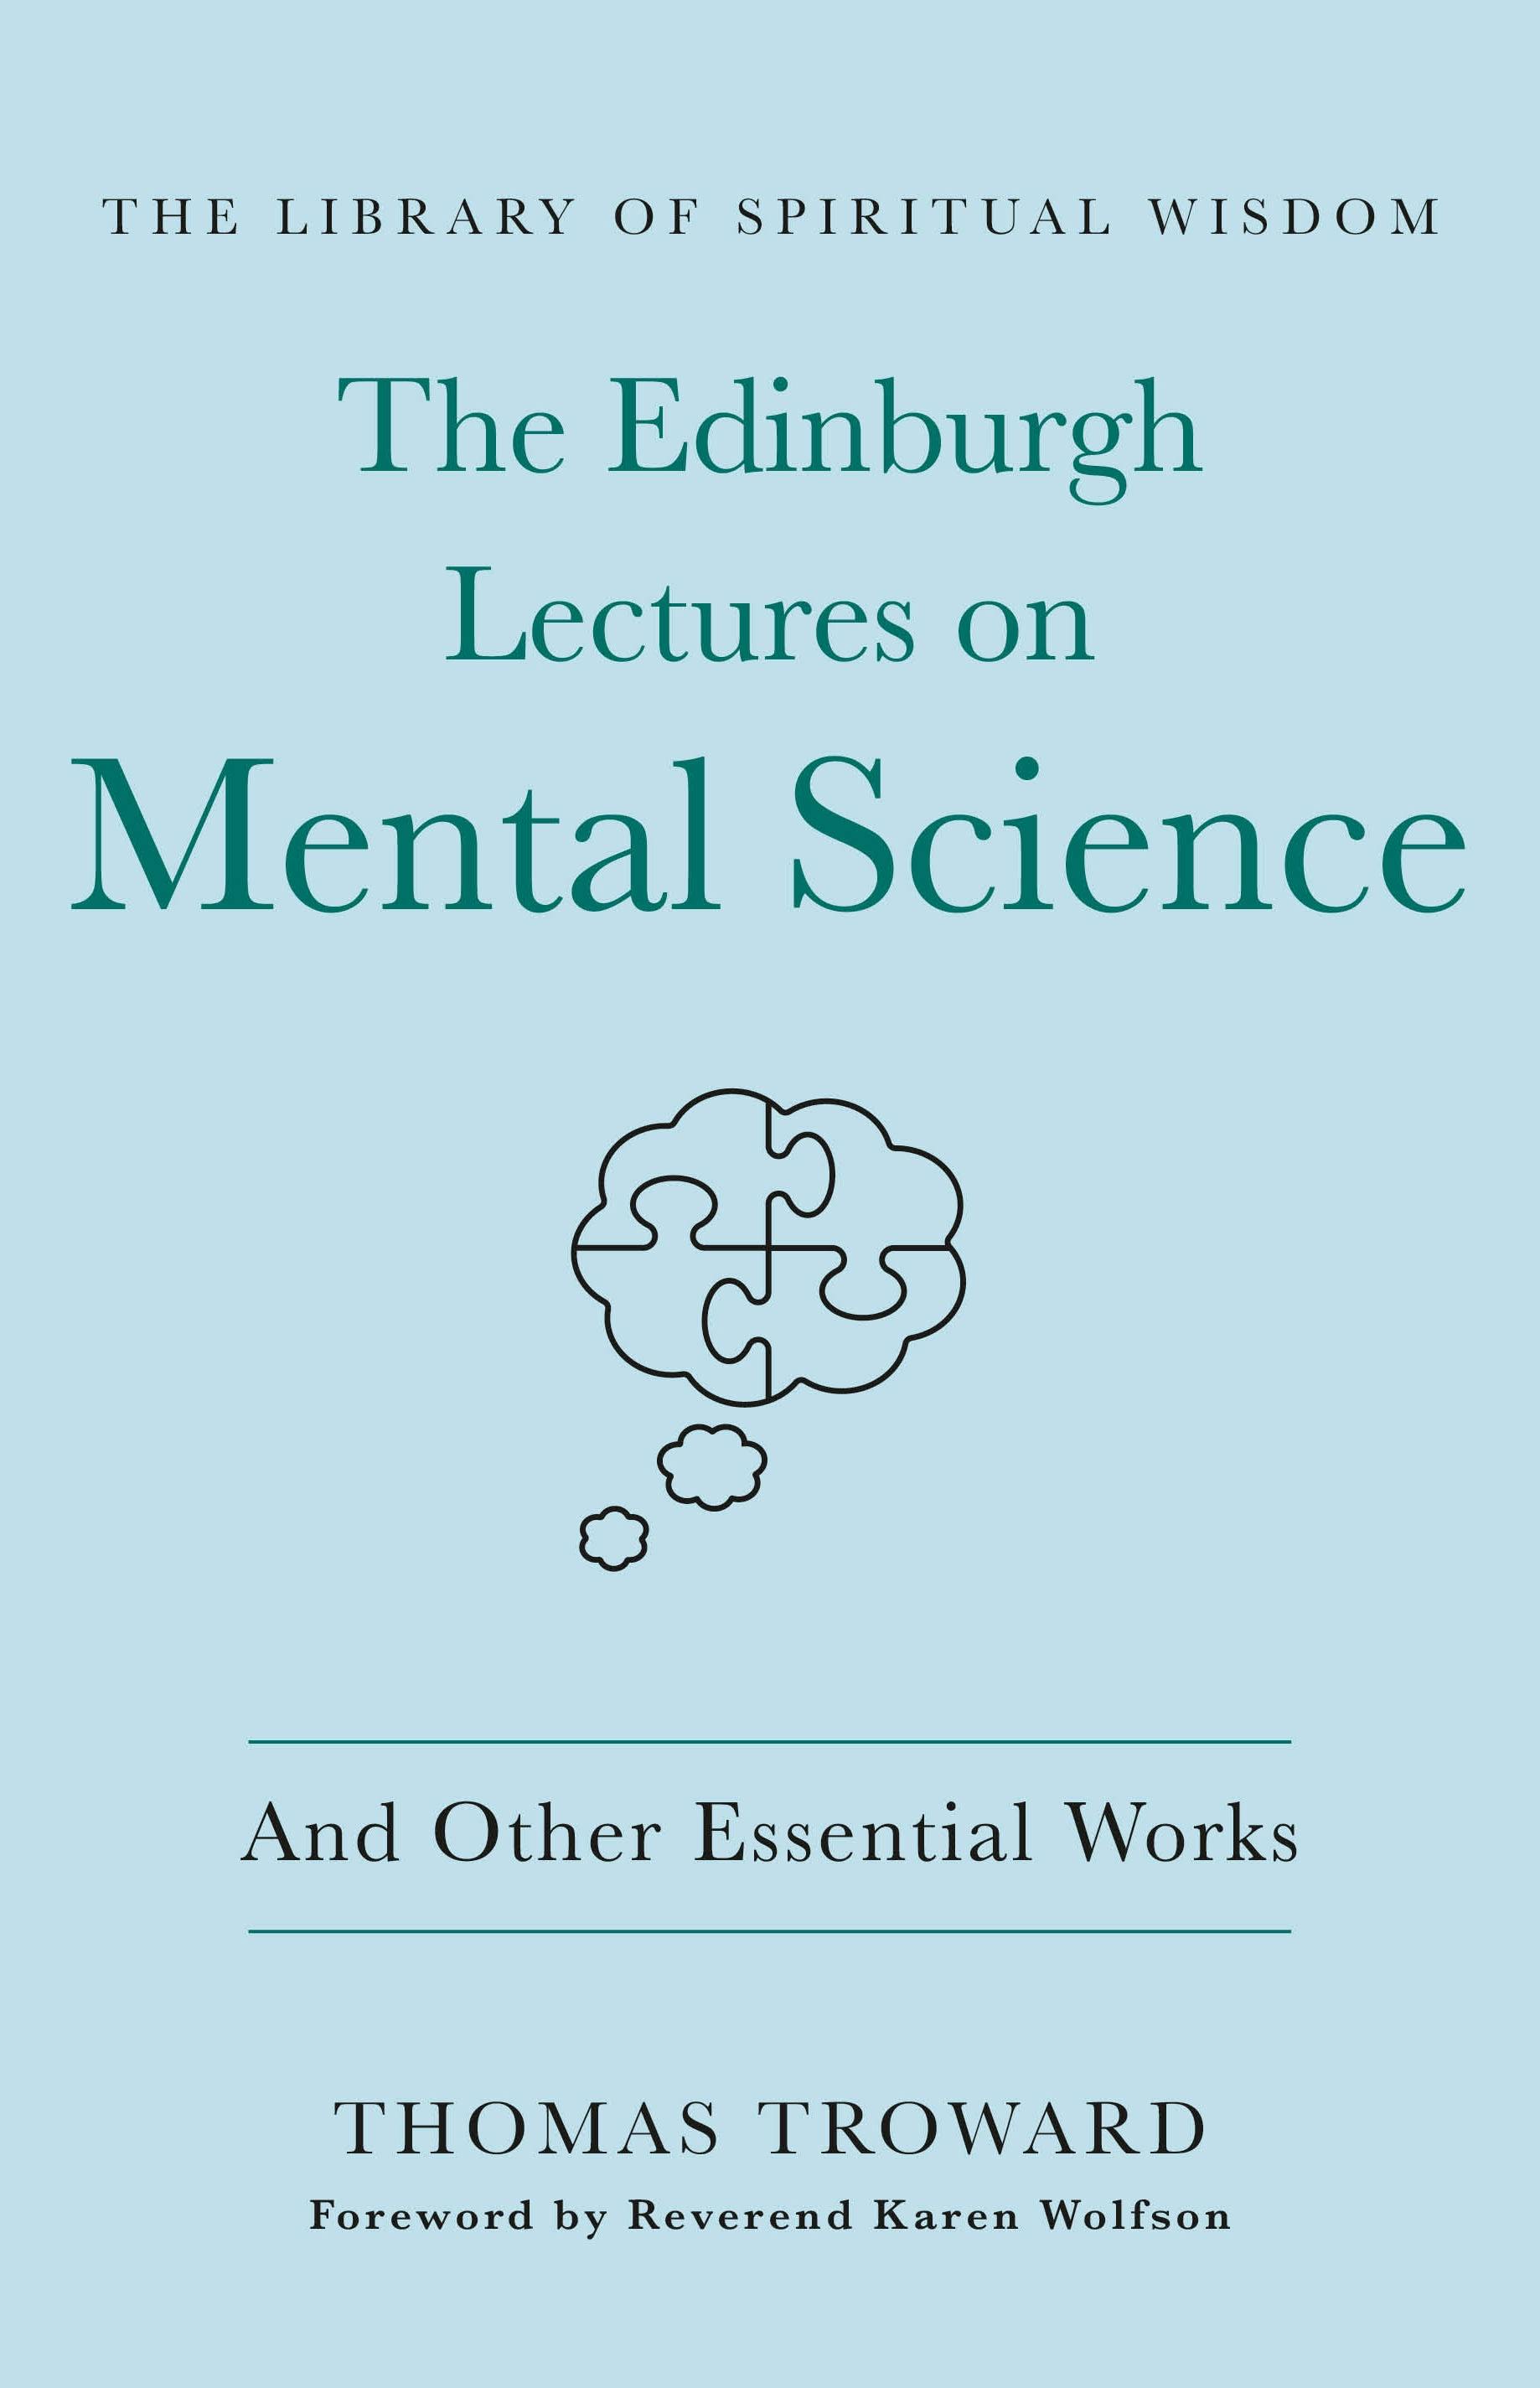 Describes for The Edinburgh Lectures on Mental Science: And Other Essential Works by authors